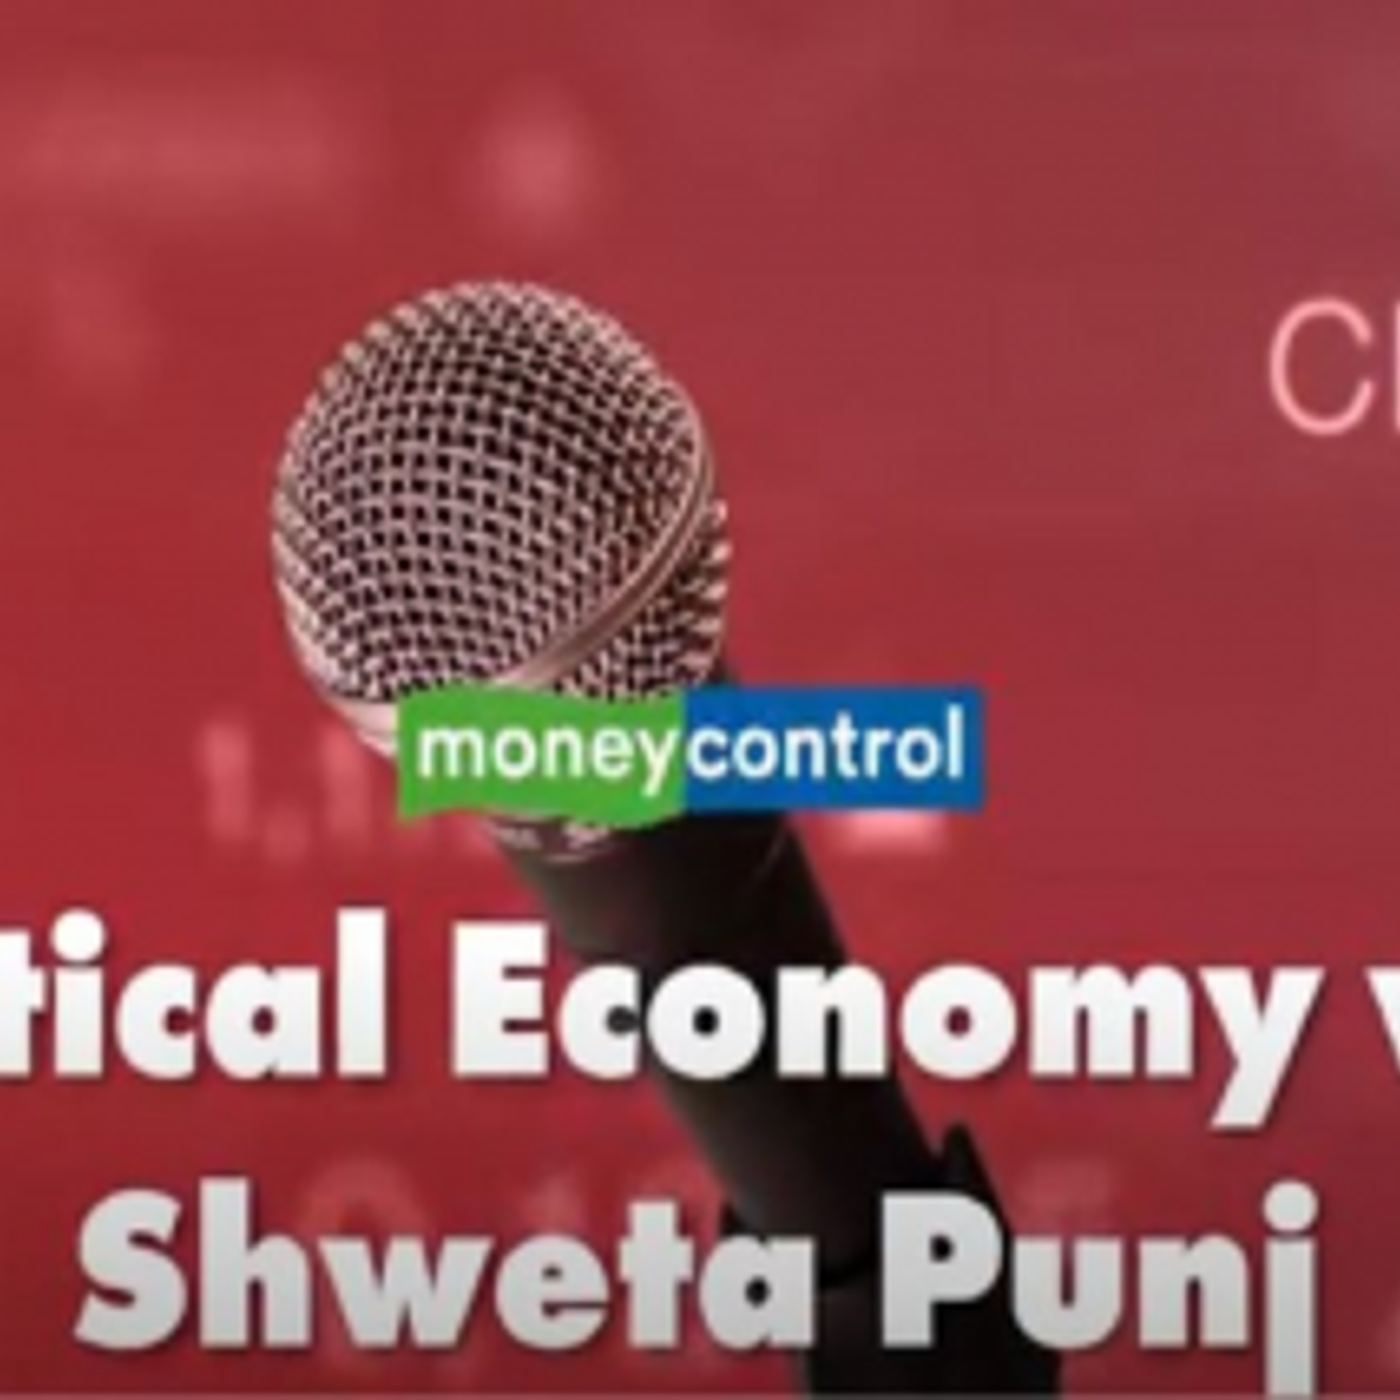 4231: How India Votes with Surjit Bhalla | Political Economy